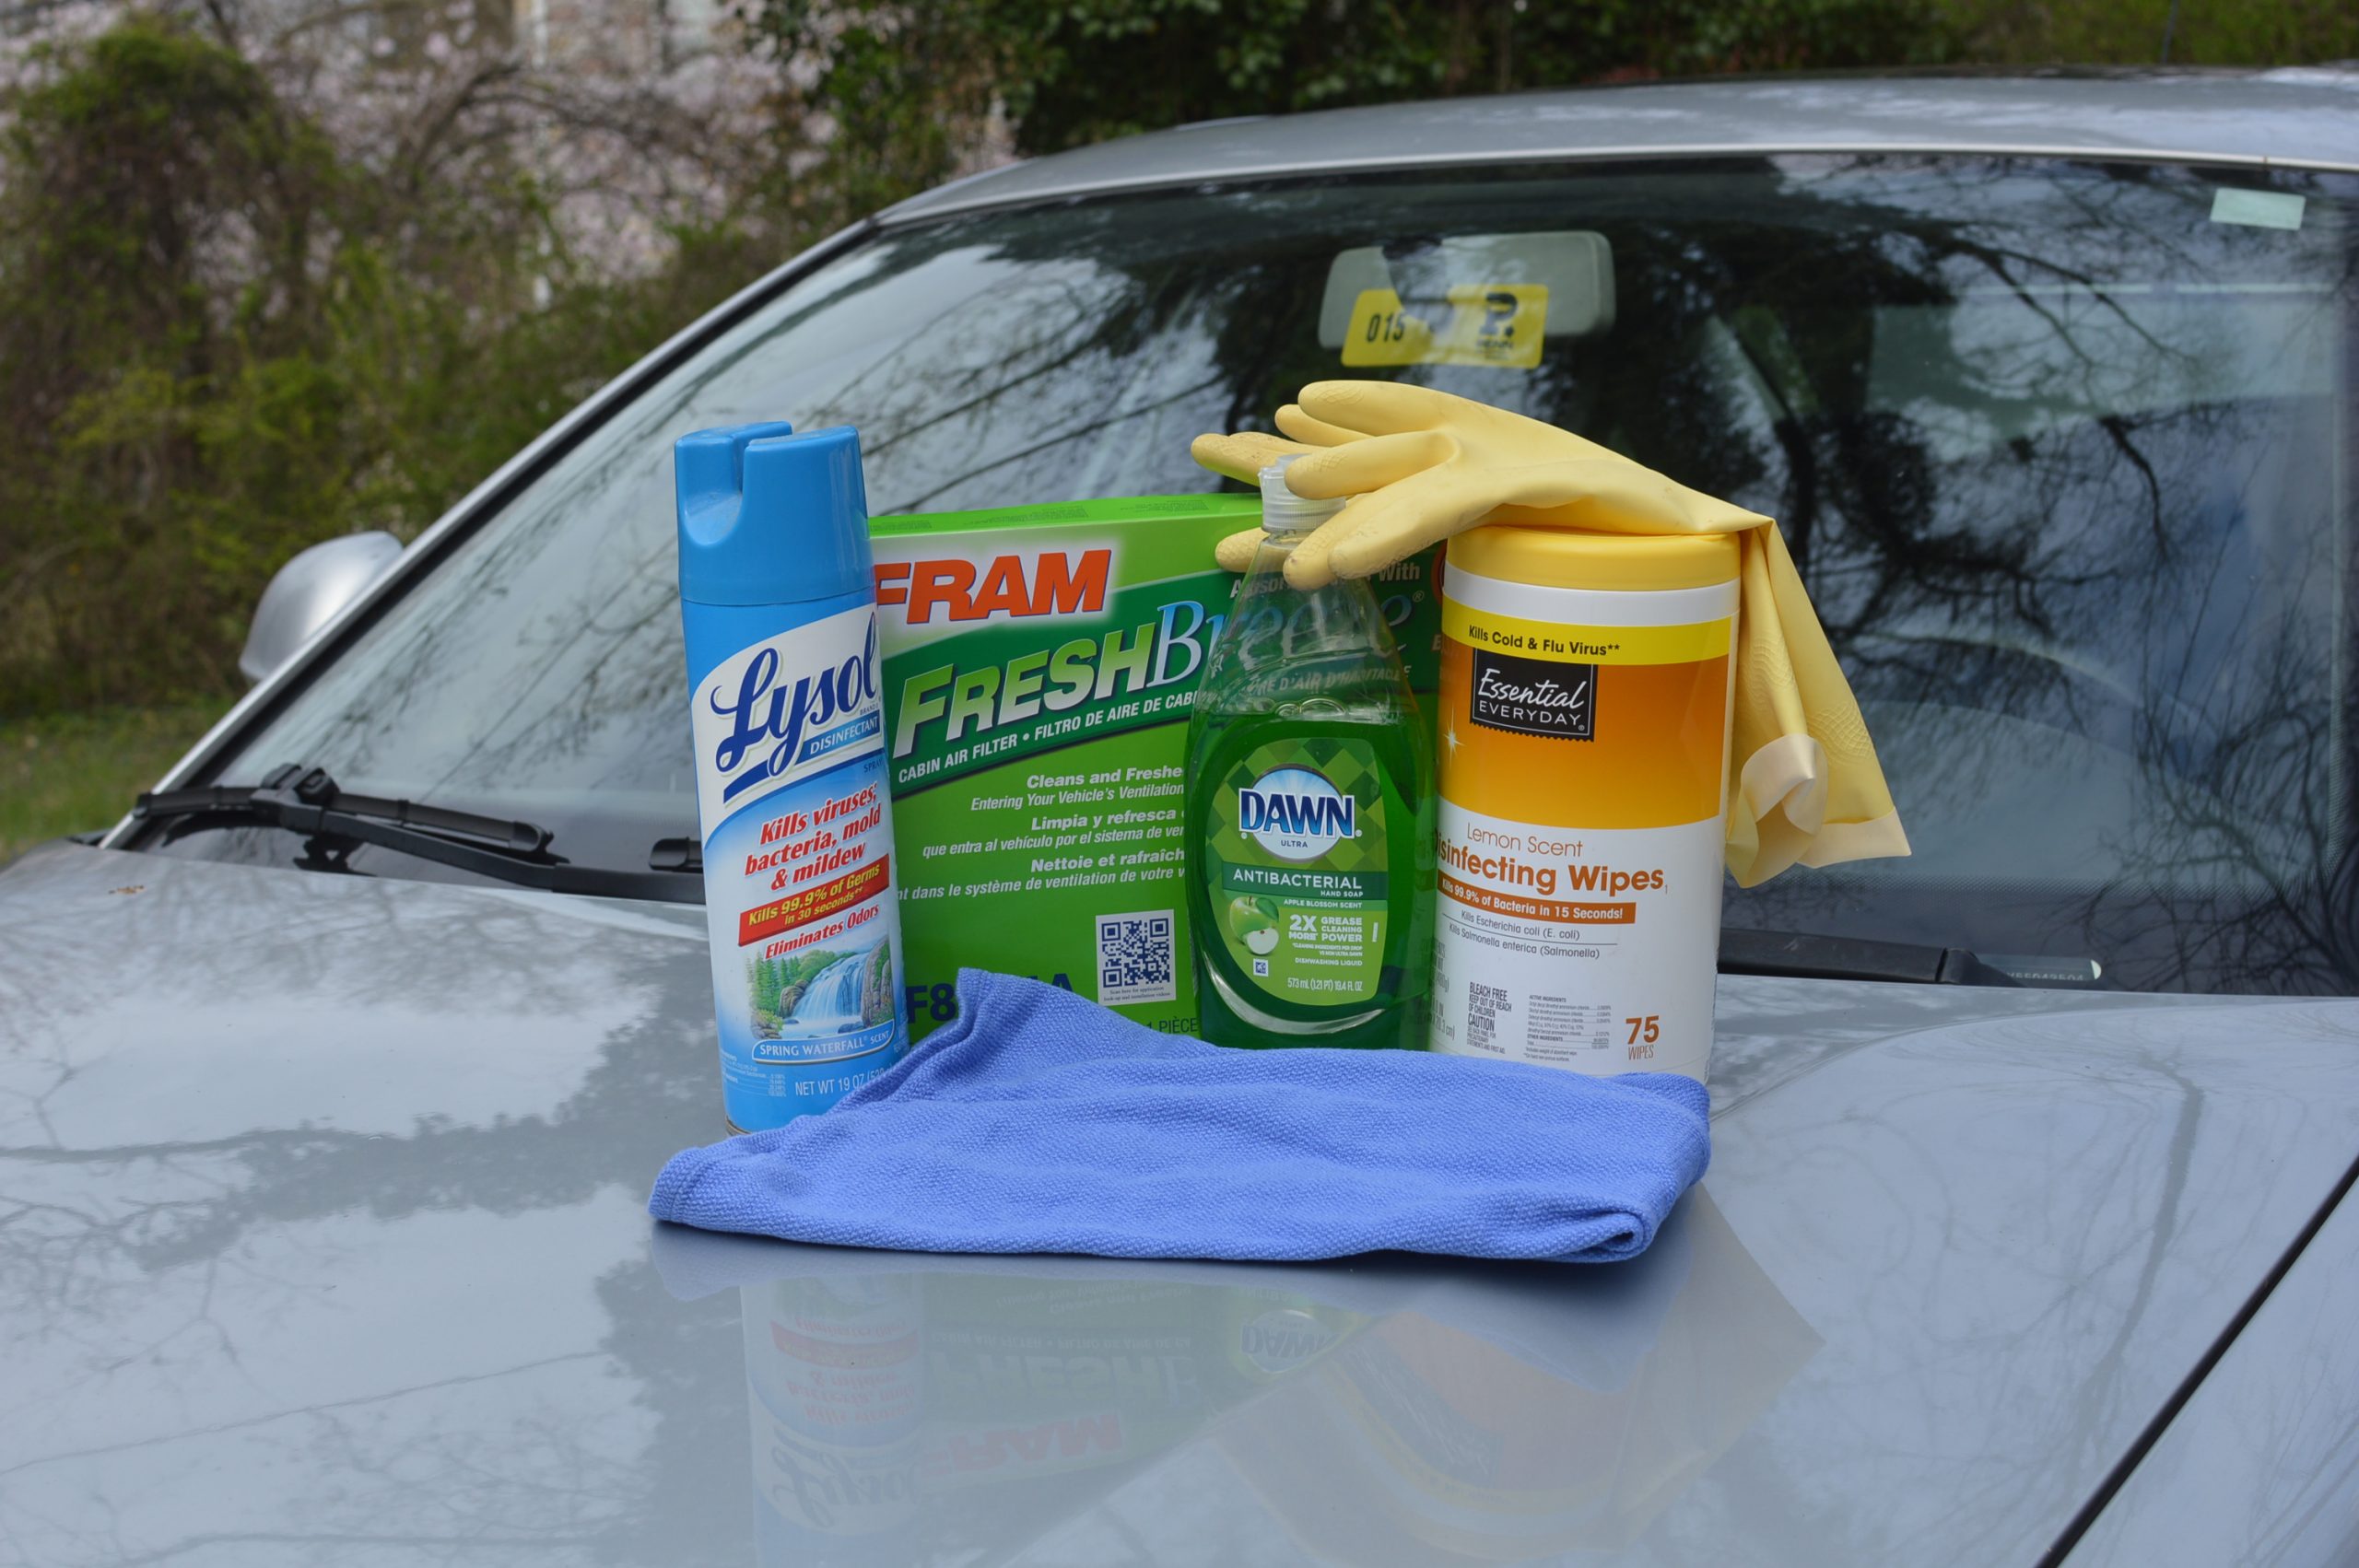 Some recommended products for coronavirus cleaning